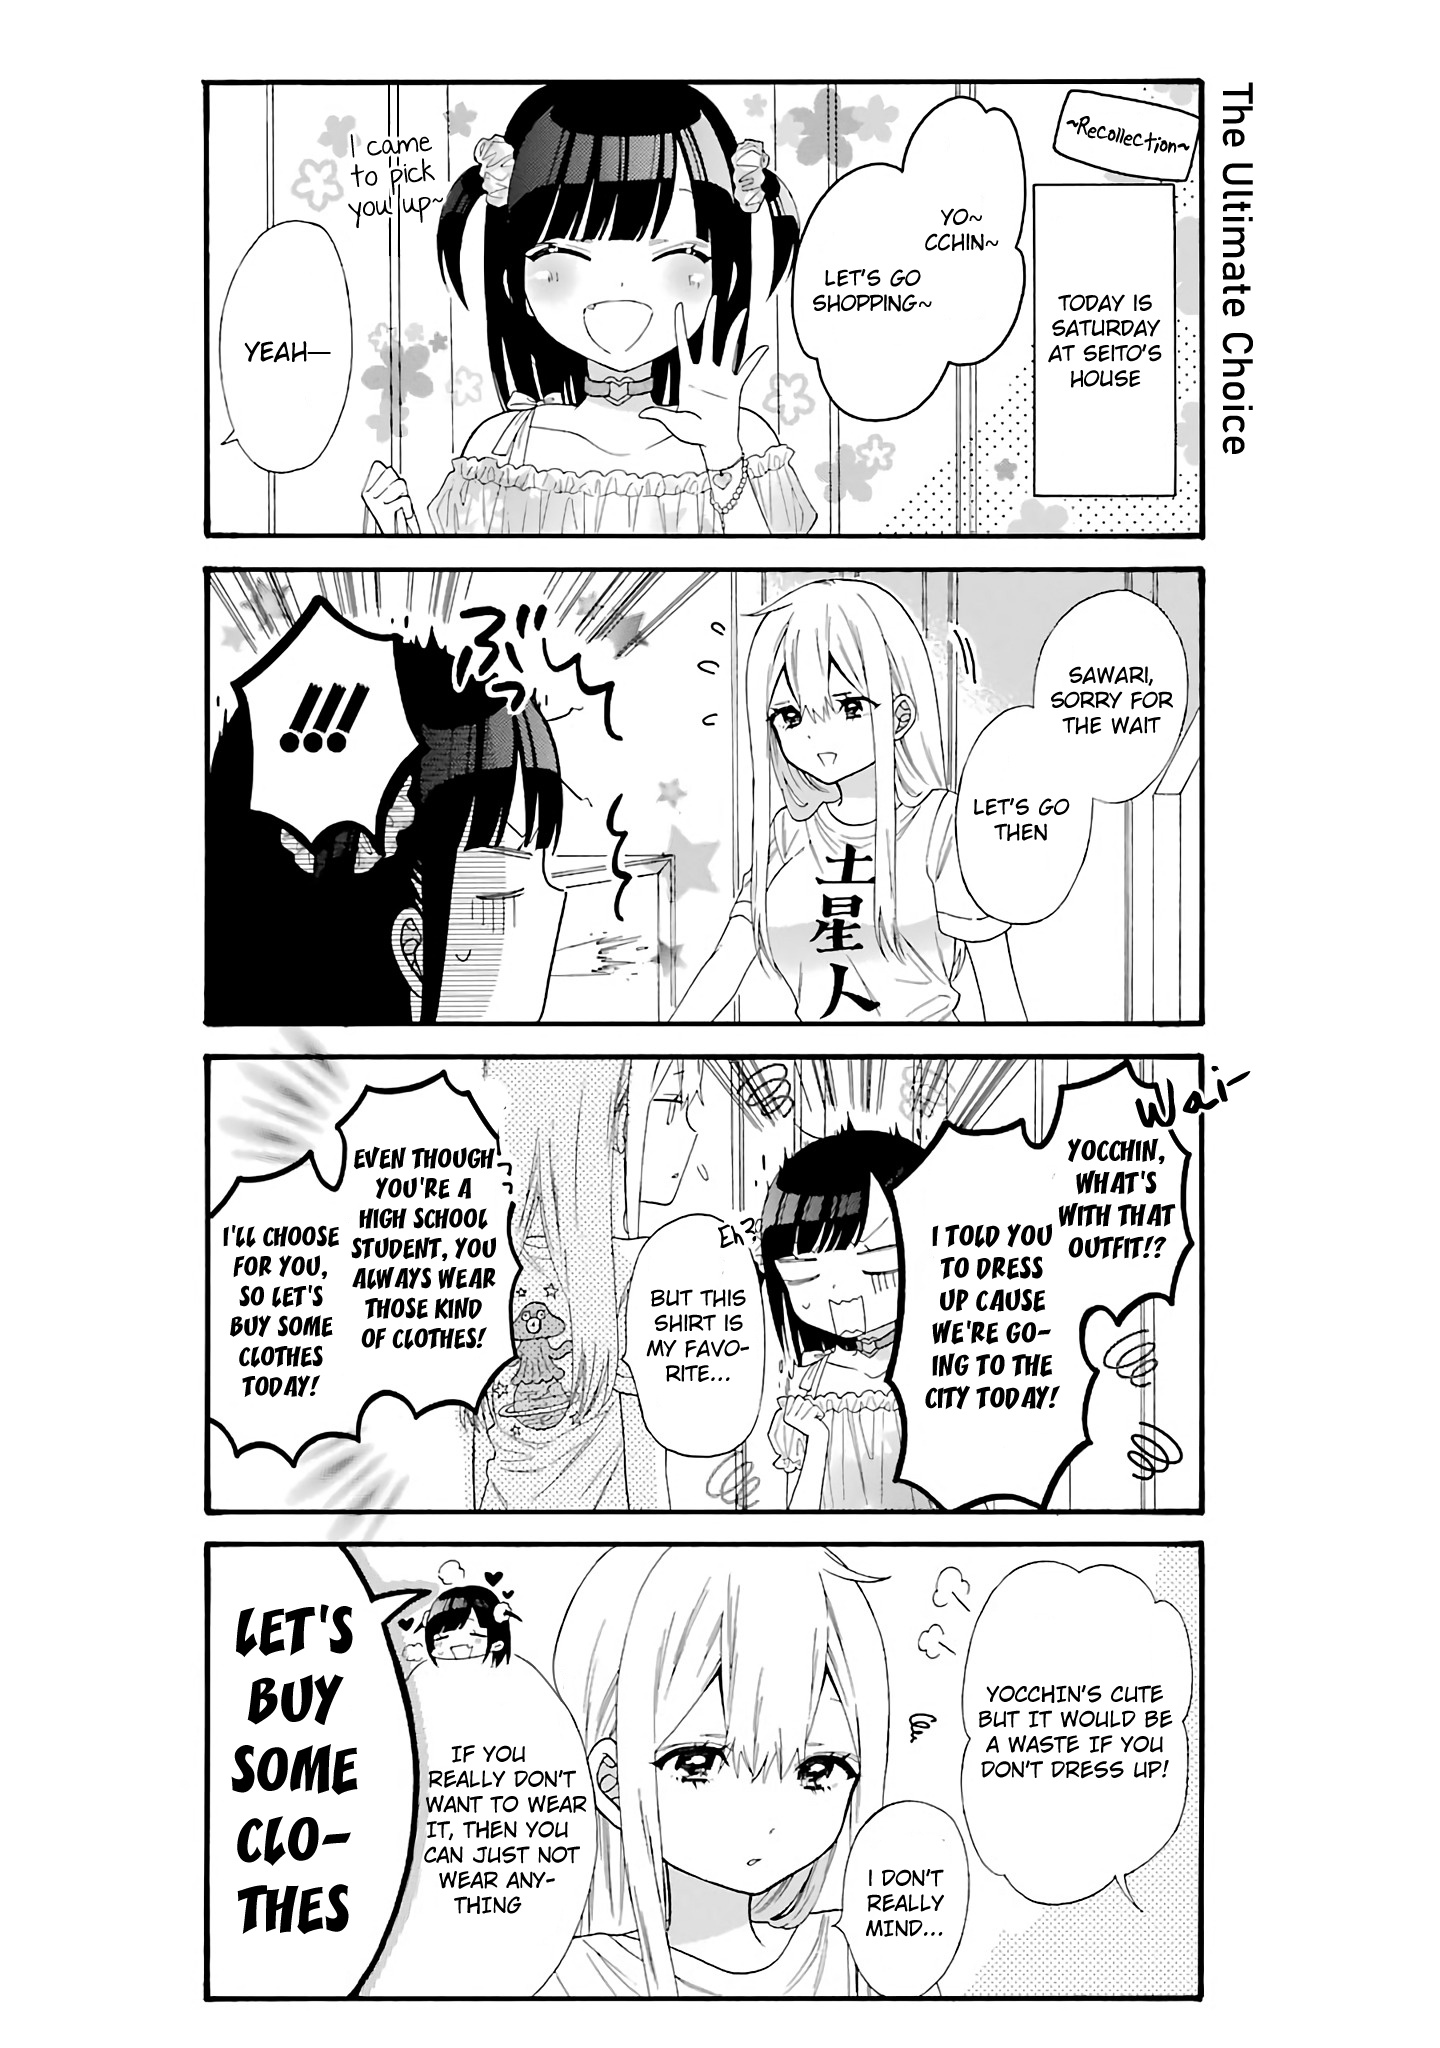 Girls X Sexual Harassment Life - Page 2